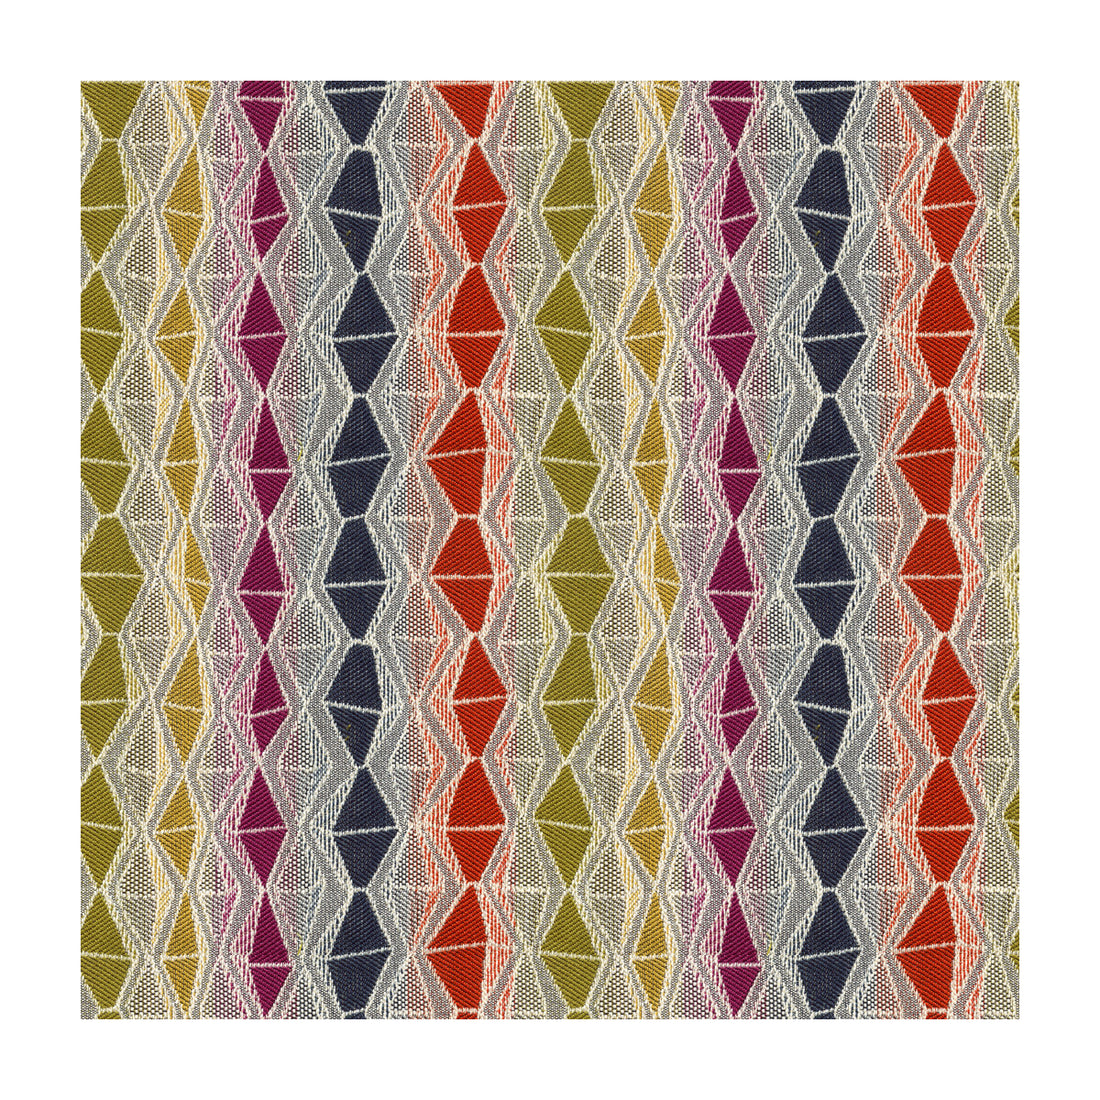 Kravet Design fabric in 33883-412 color - pattern 33883.412.0 - by Kravet Design in the Tanzania J Banks collection